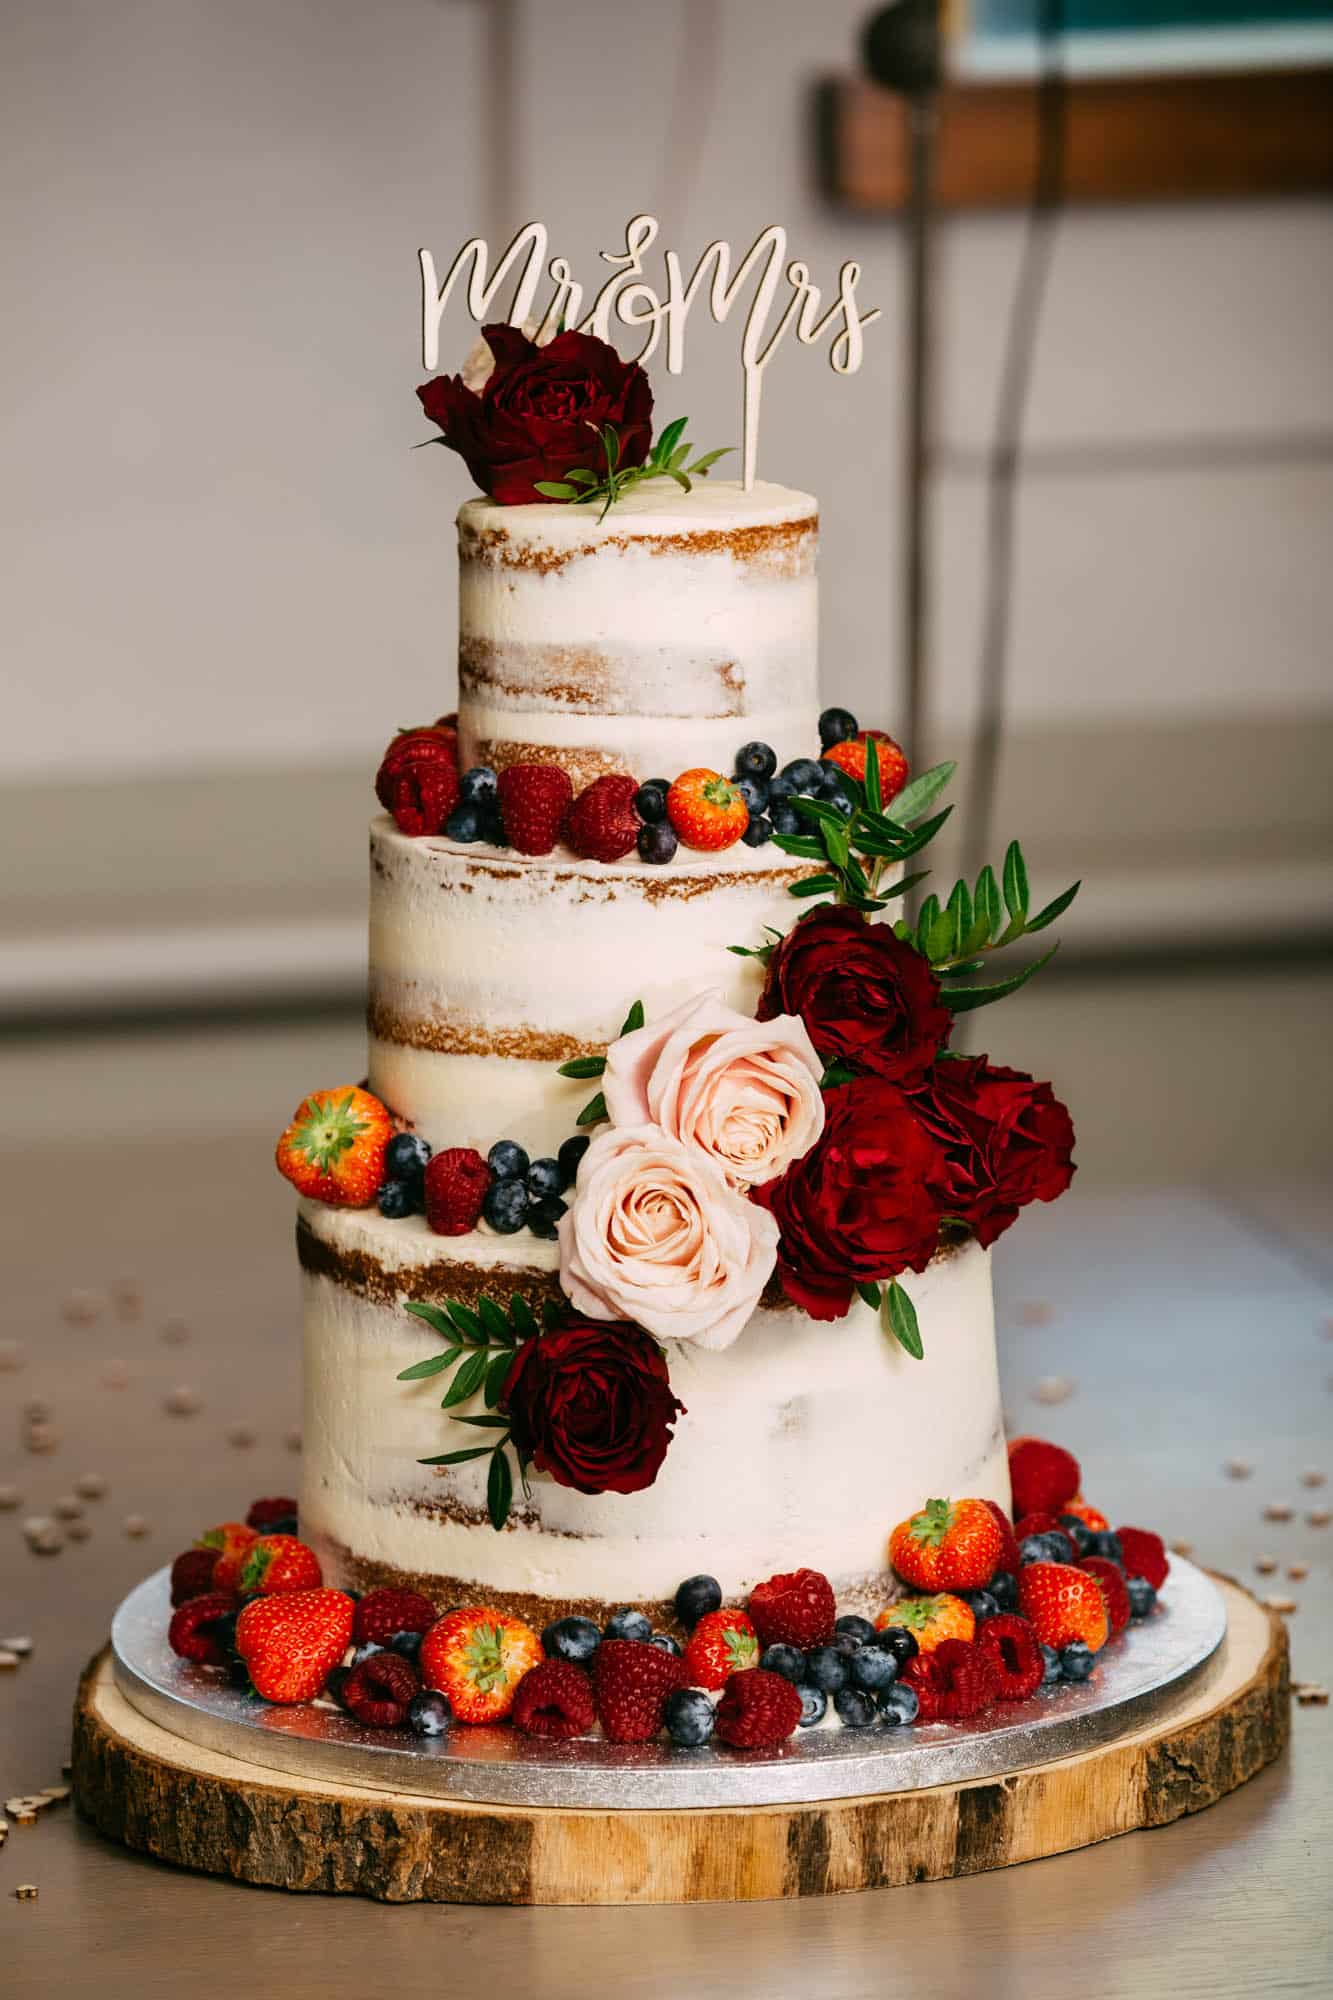 Naked wedding cake with No & Mrs on top.